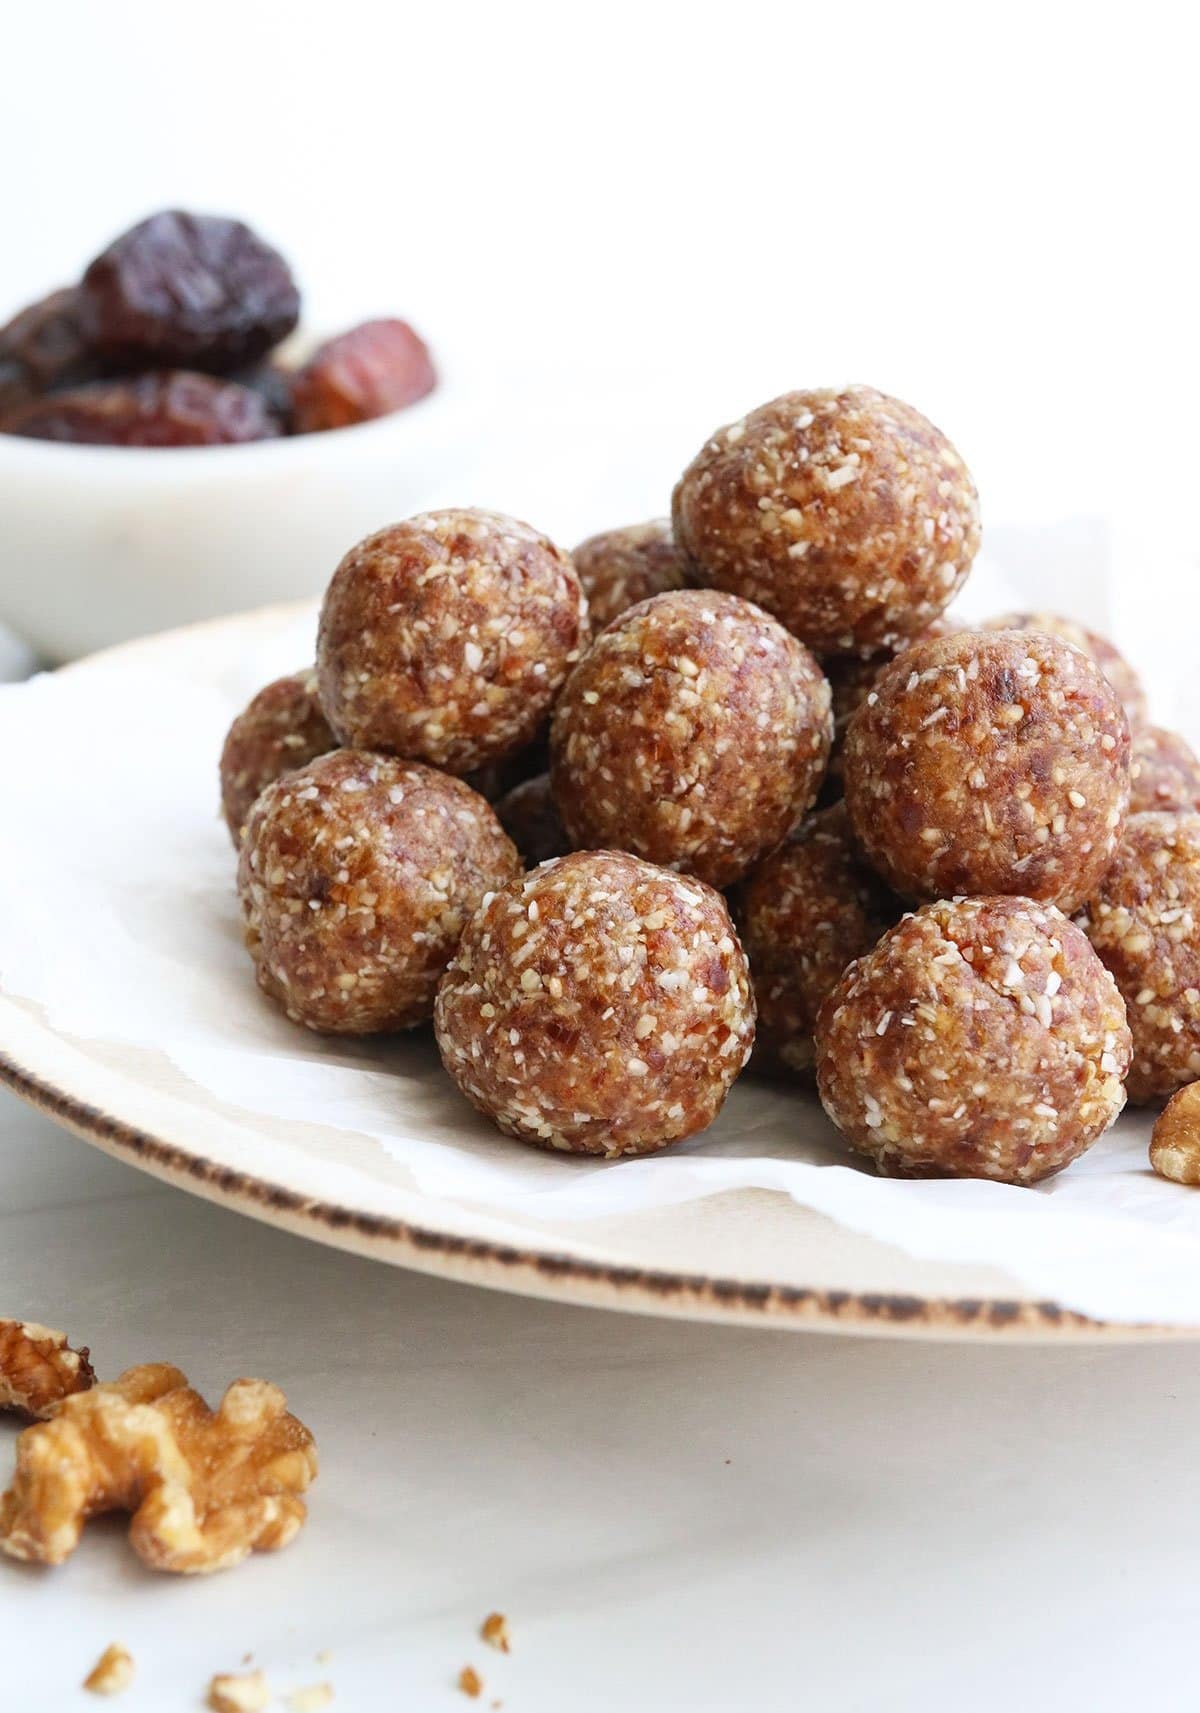 Bunch of date balls in a white plate.